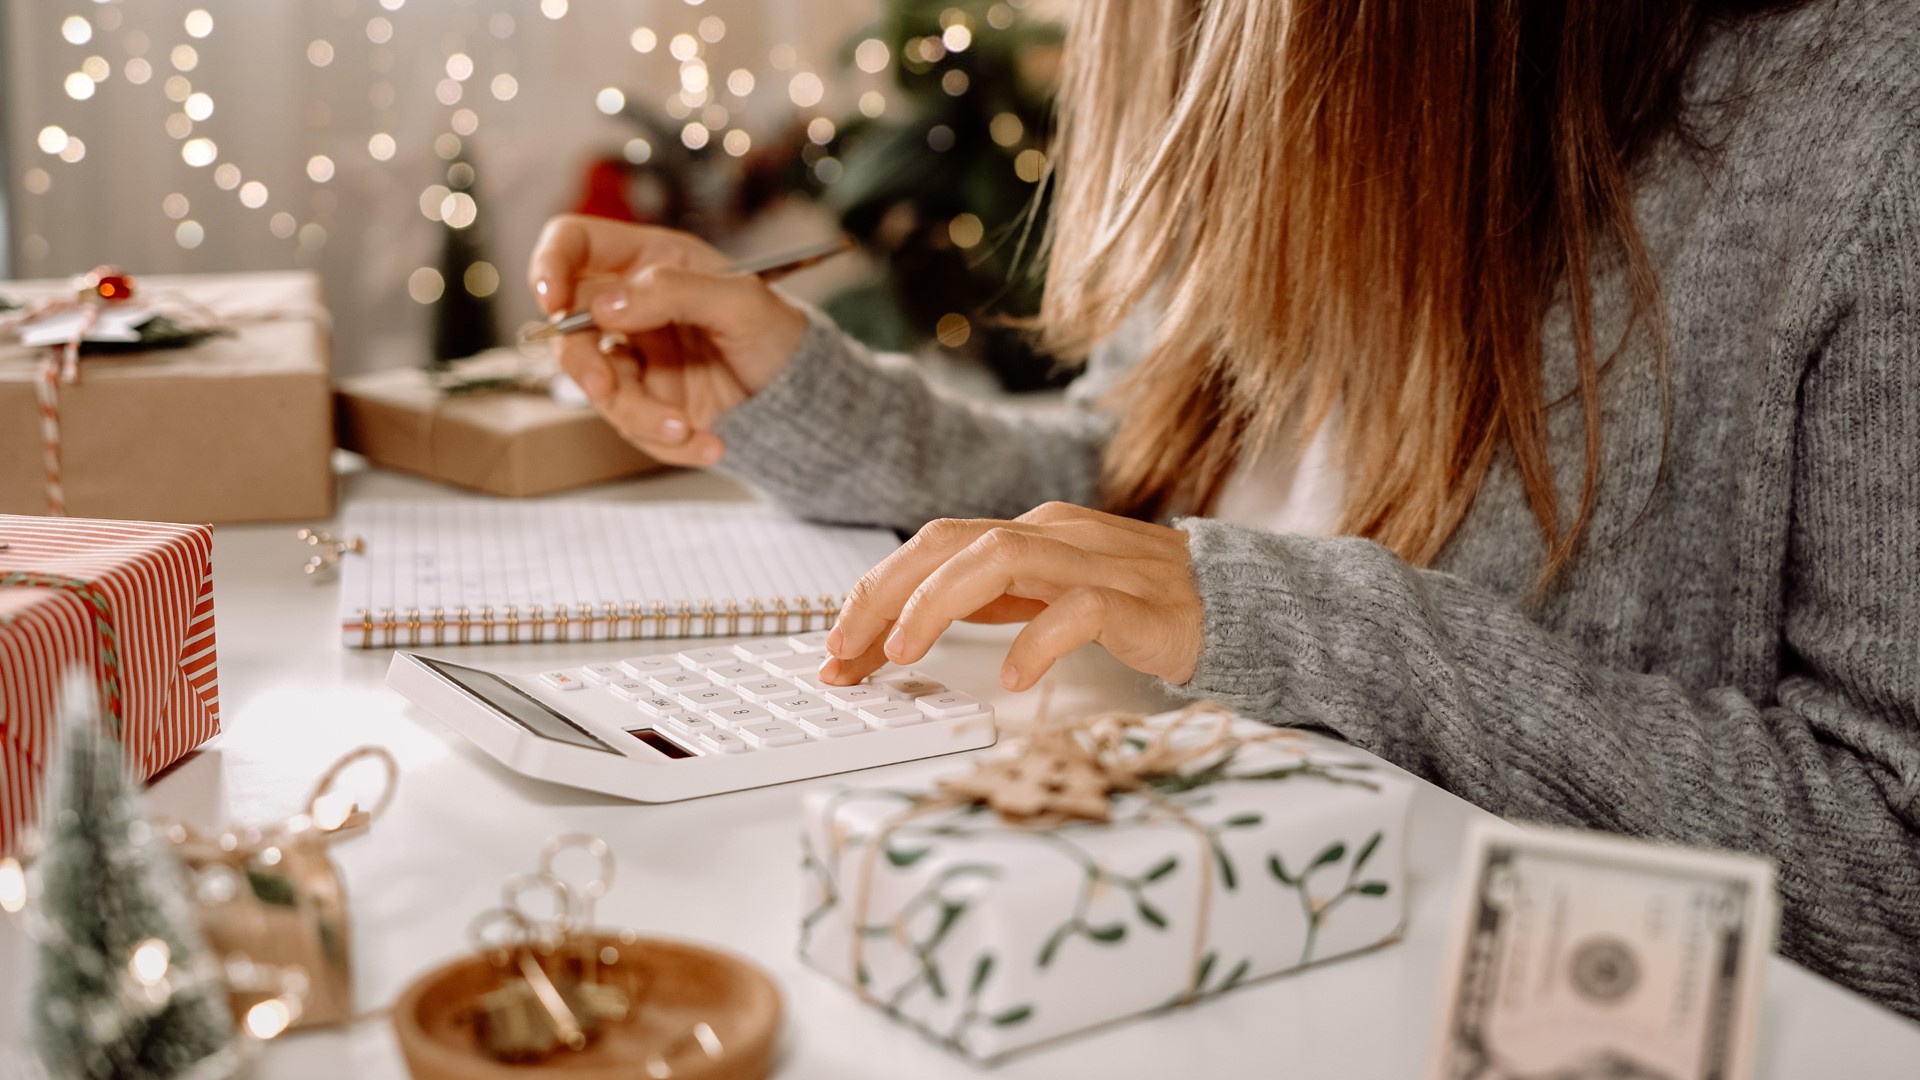 A November survey by WalletHub found shoppers are experiencing lingering holiday debt. To avoid more, Dr. Saloni Vastani at Emory University gives shoppers tips.